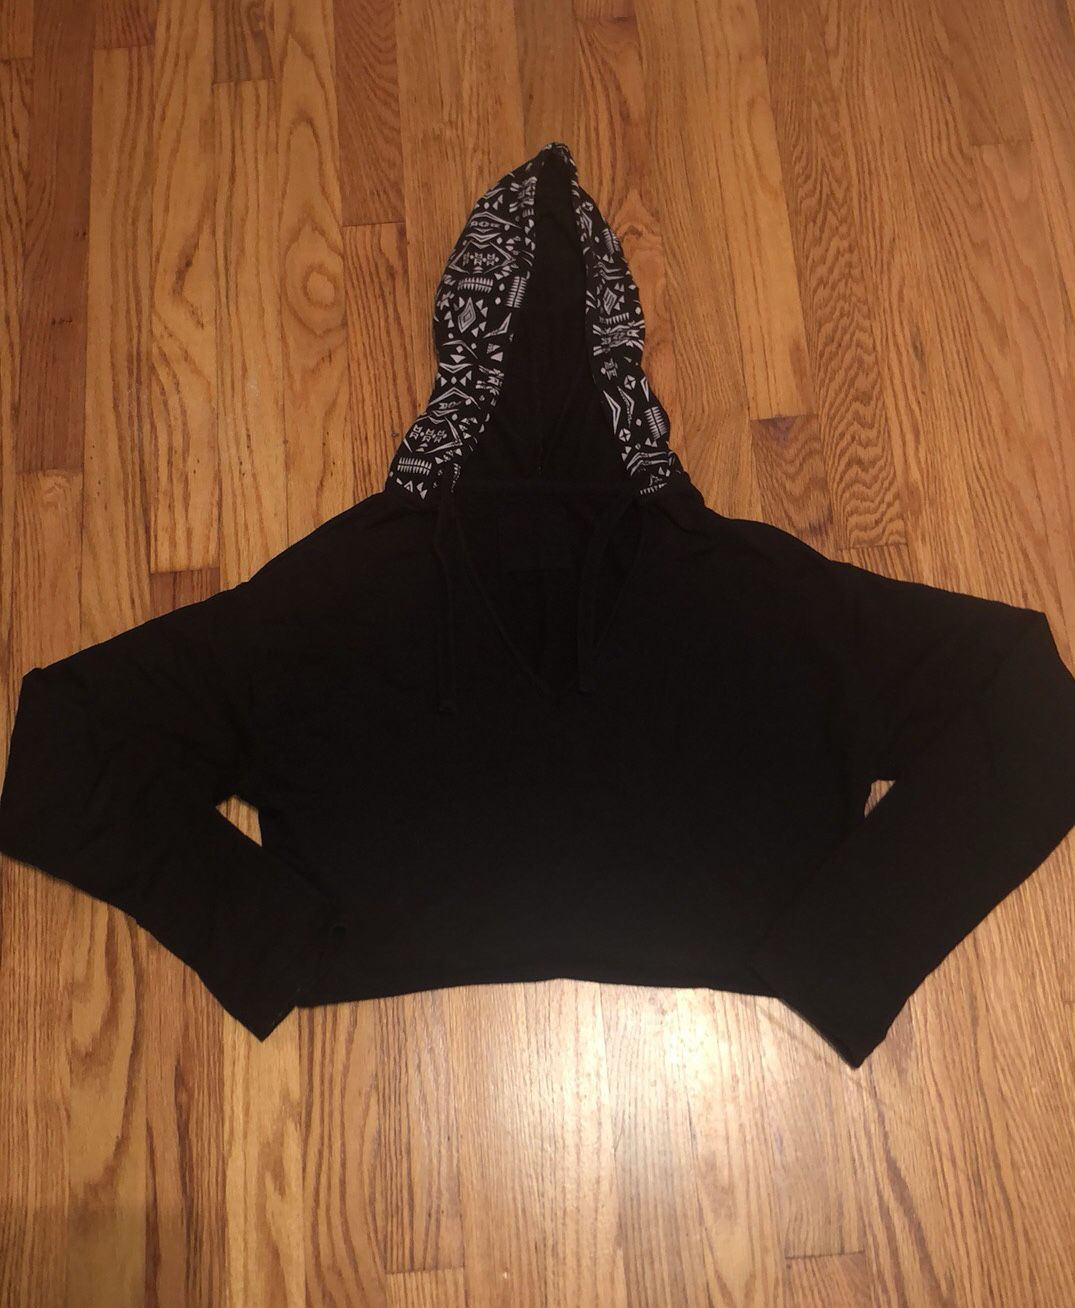 Size large black and white cropped hoodie. Has a small bleach spot on the sleeve. Not noticeable when wearing